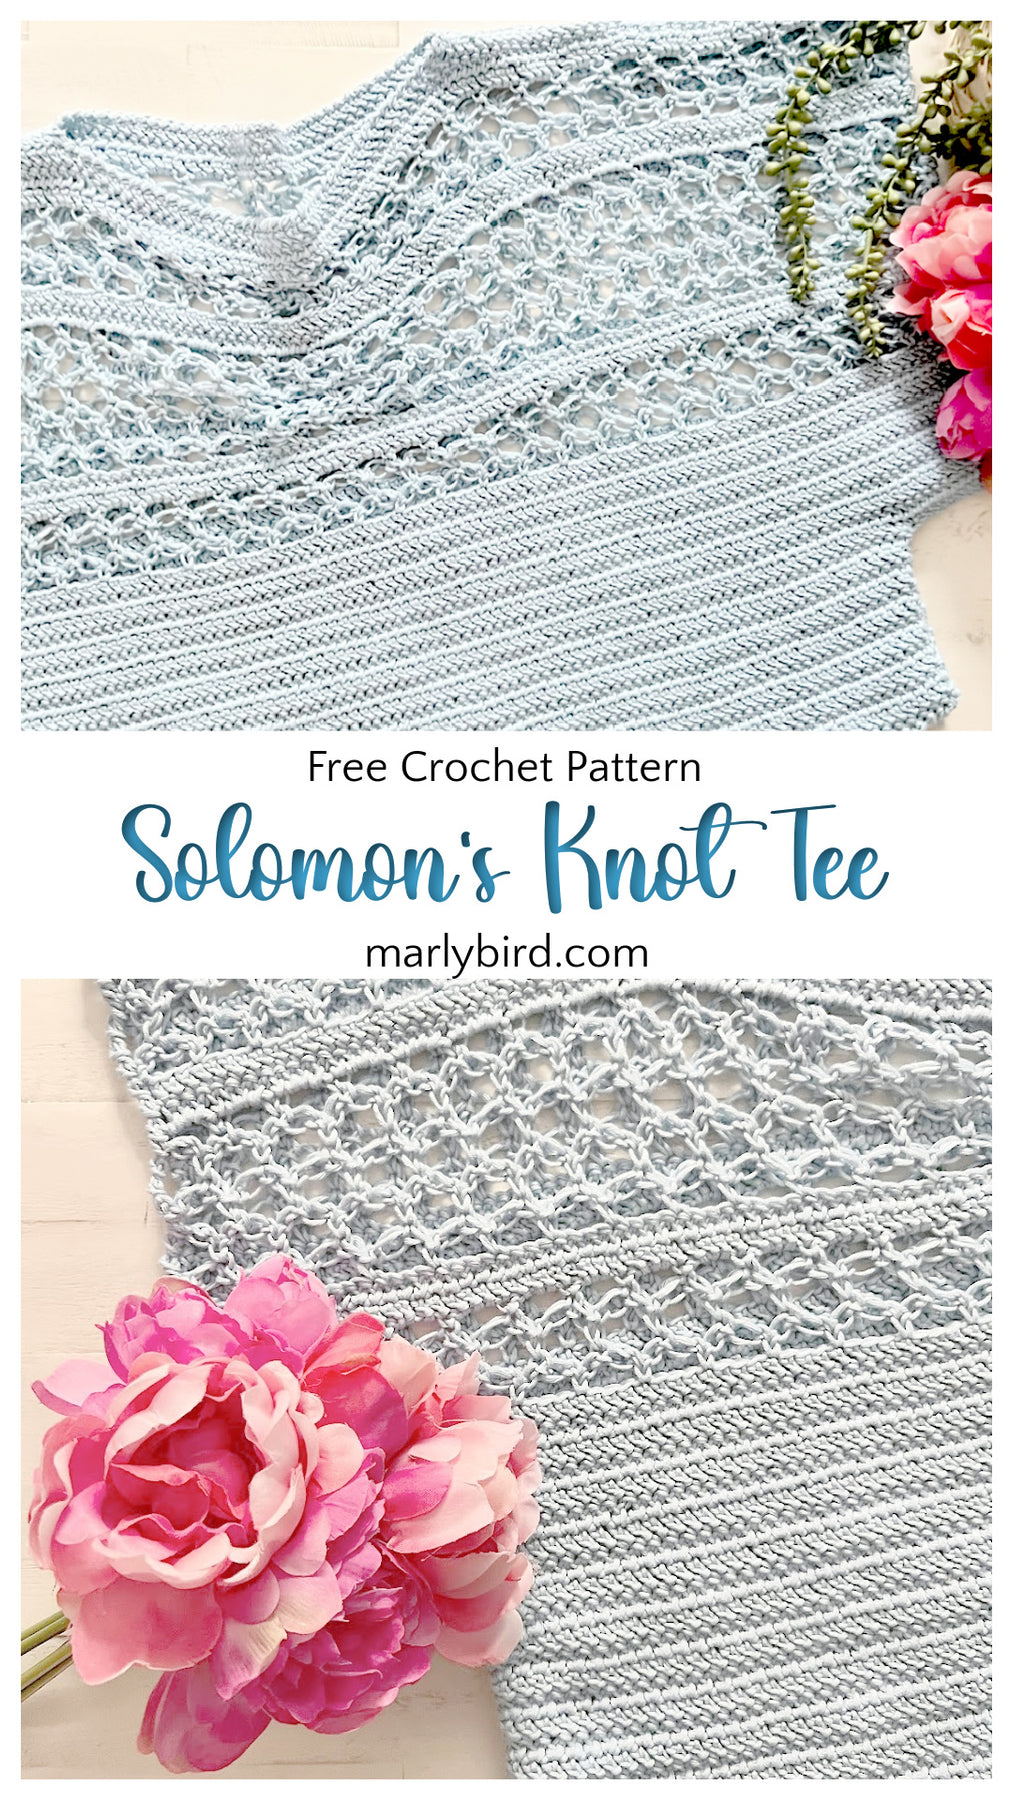 Unique Crochet Patterns and Projects with Solomon's Knot Stitch